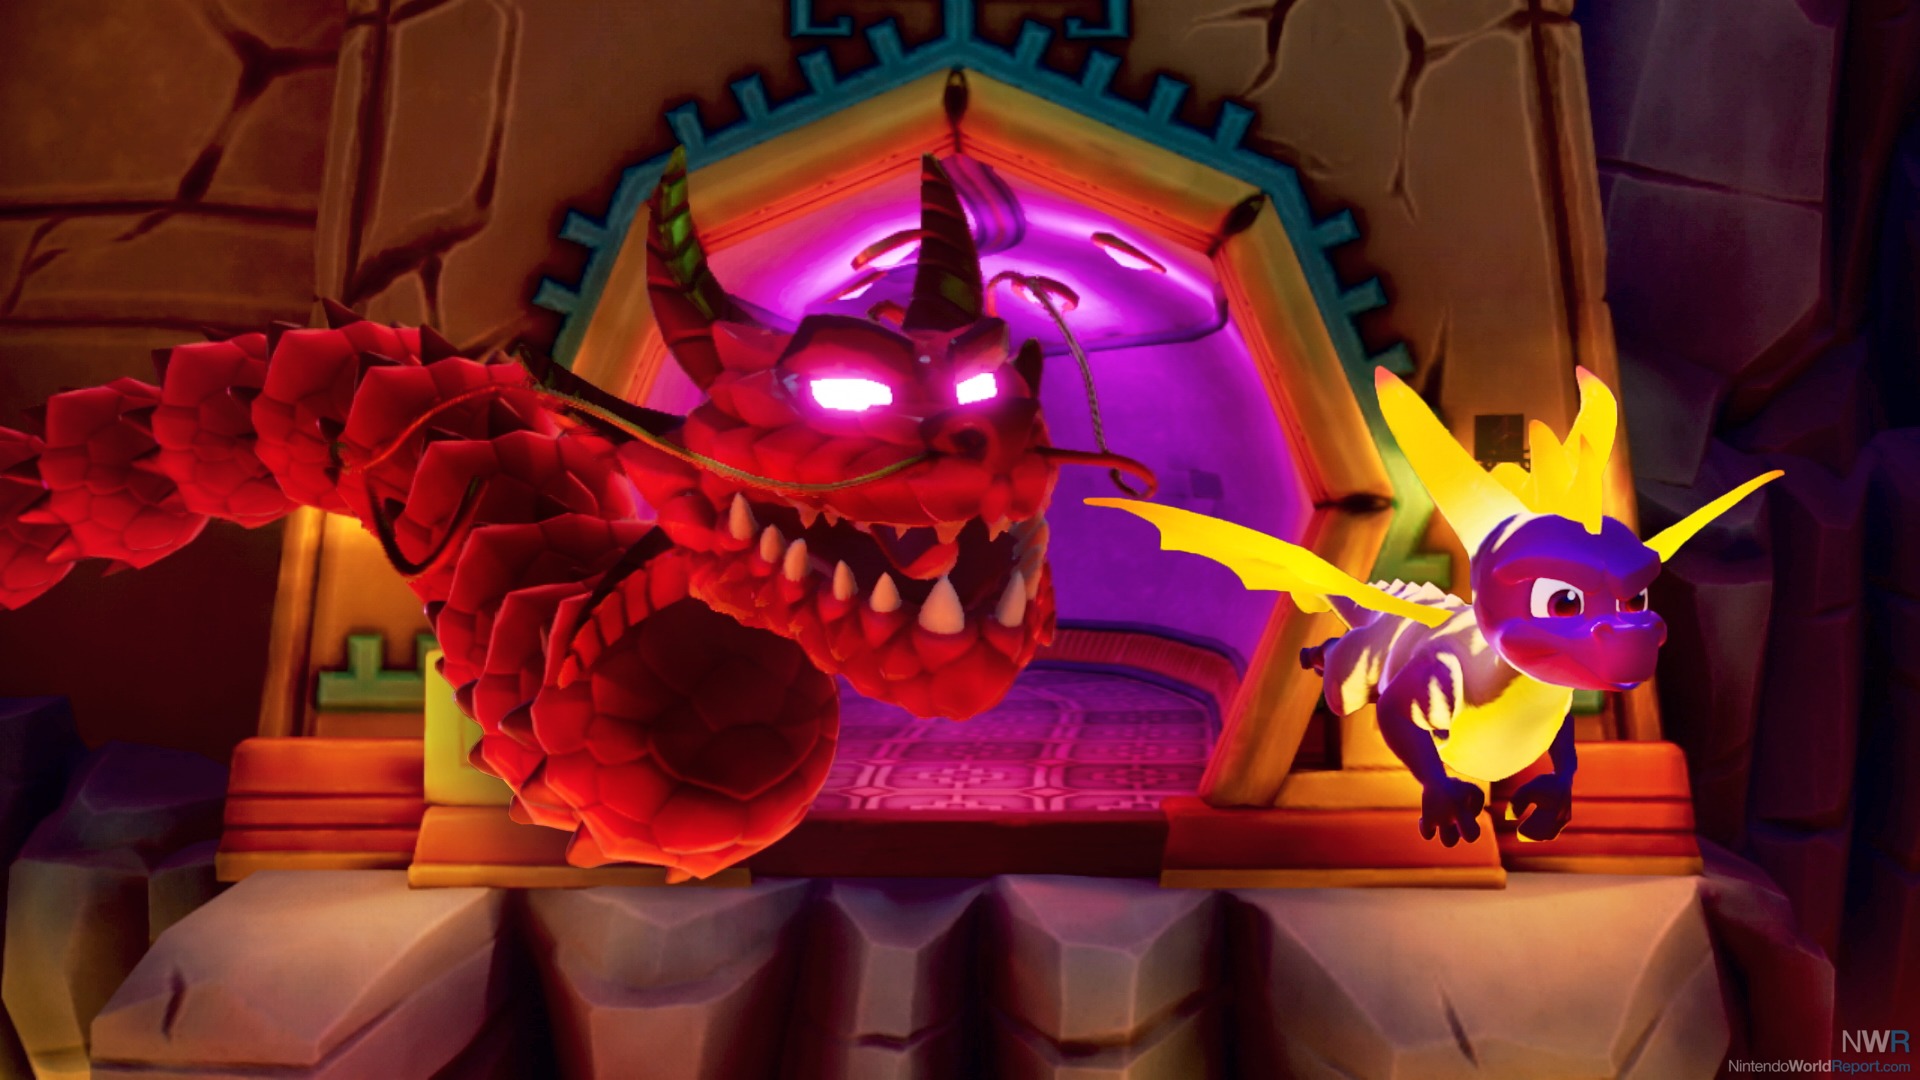 spyro reignited trilogy review